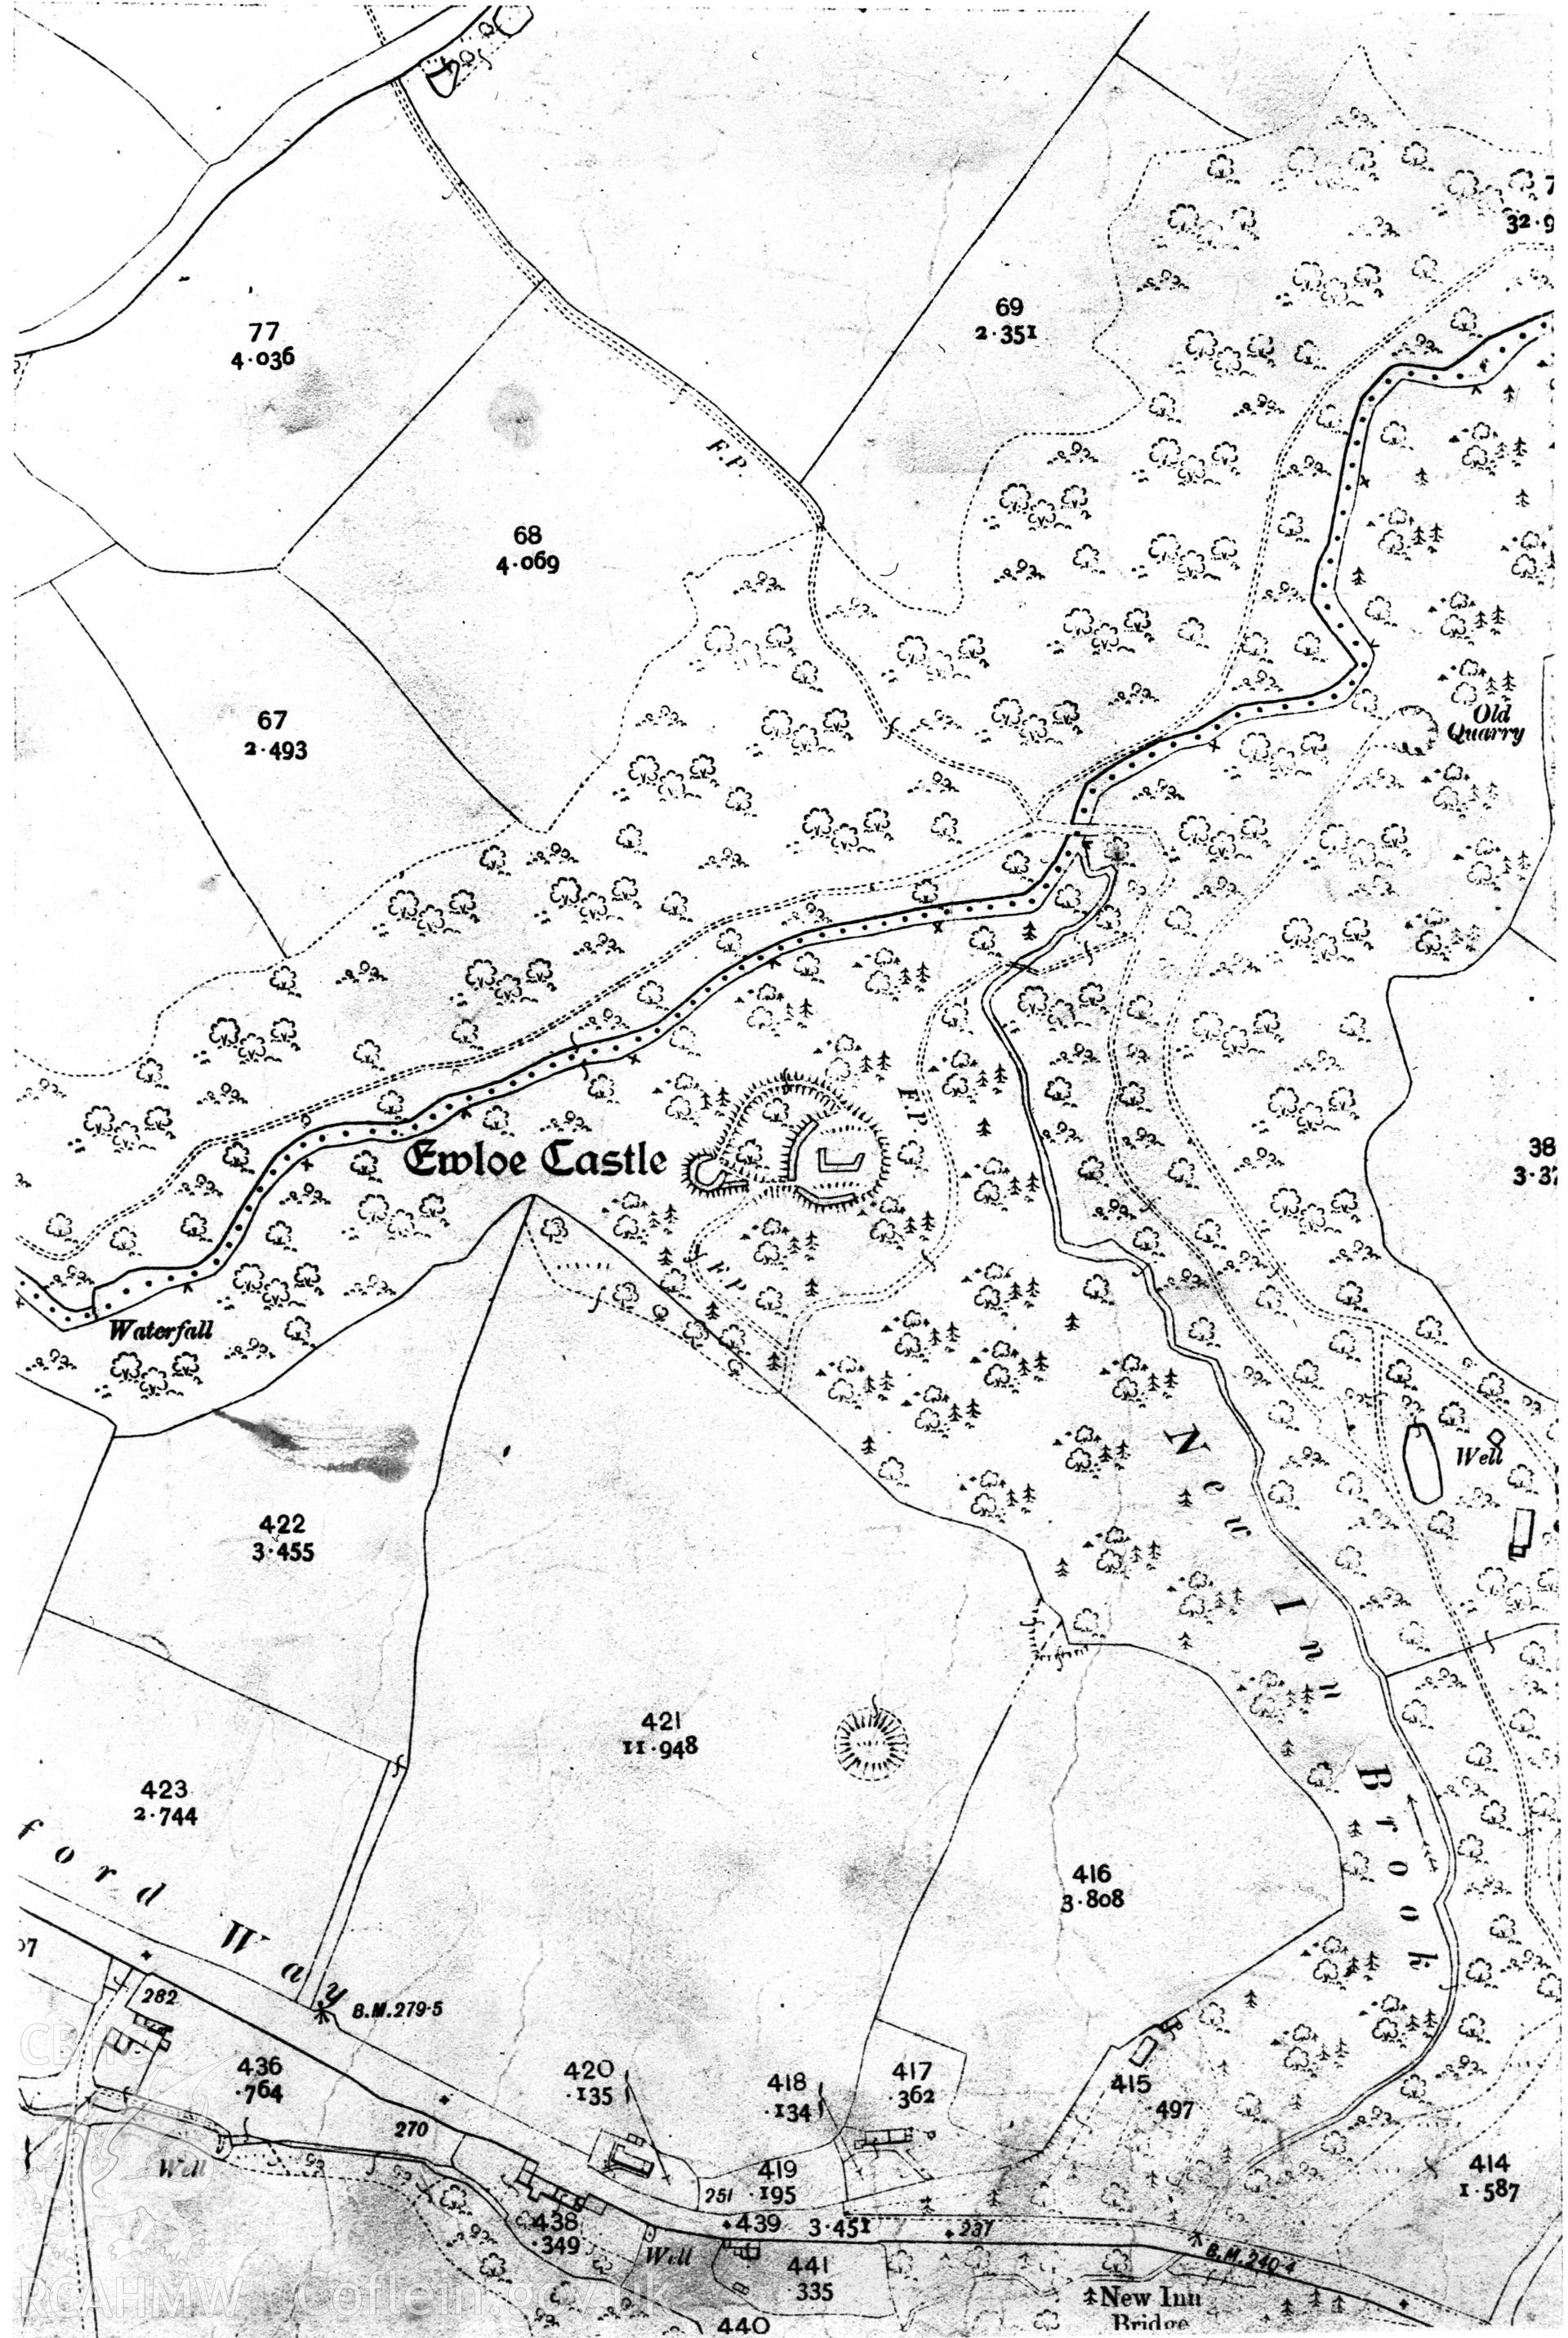 Section of a large scale map showing plan of Ewloe Castle.